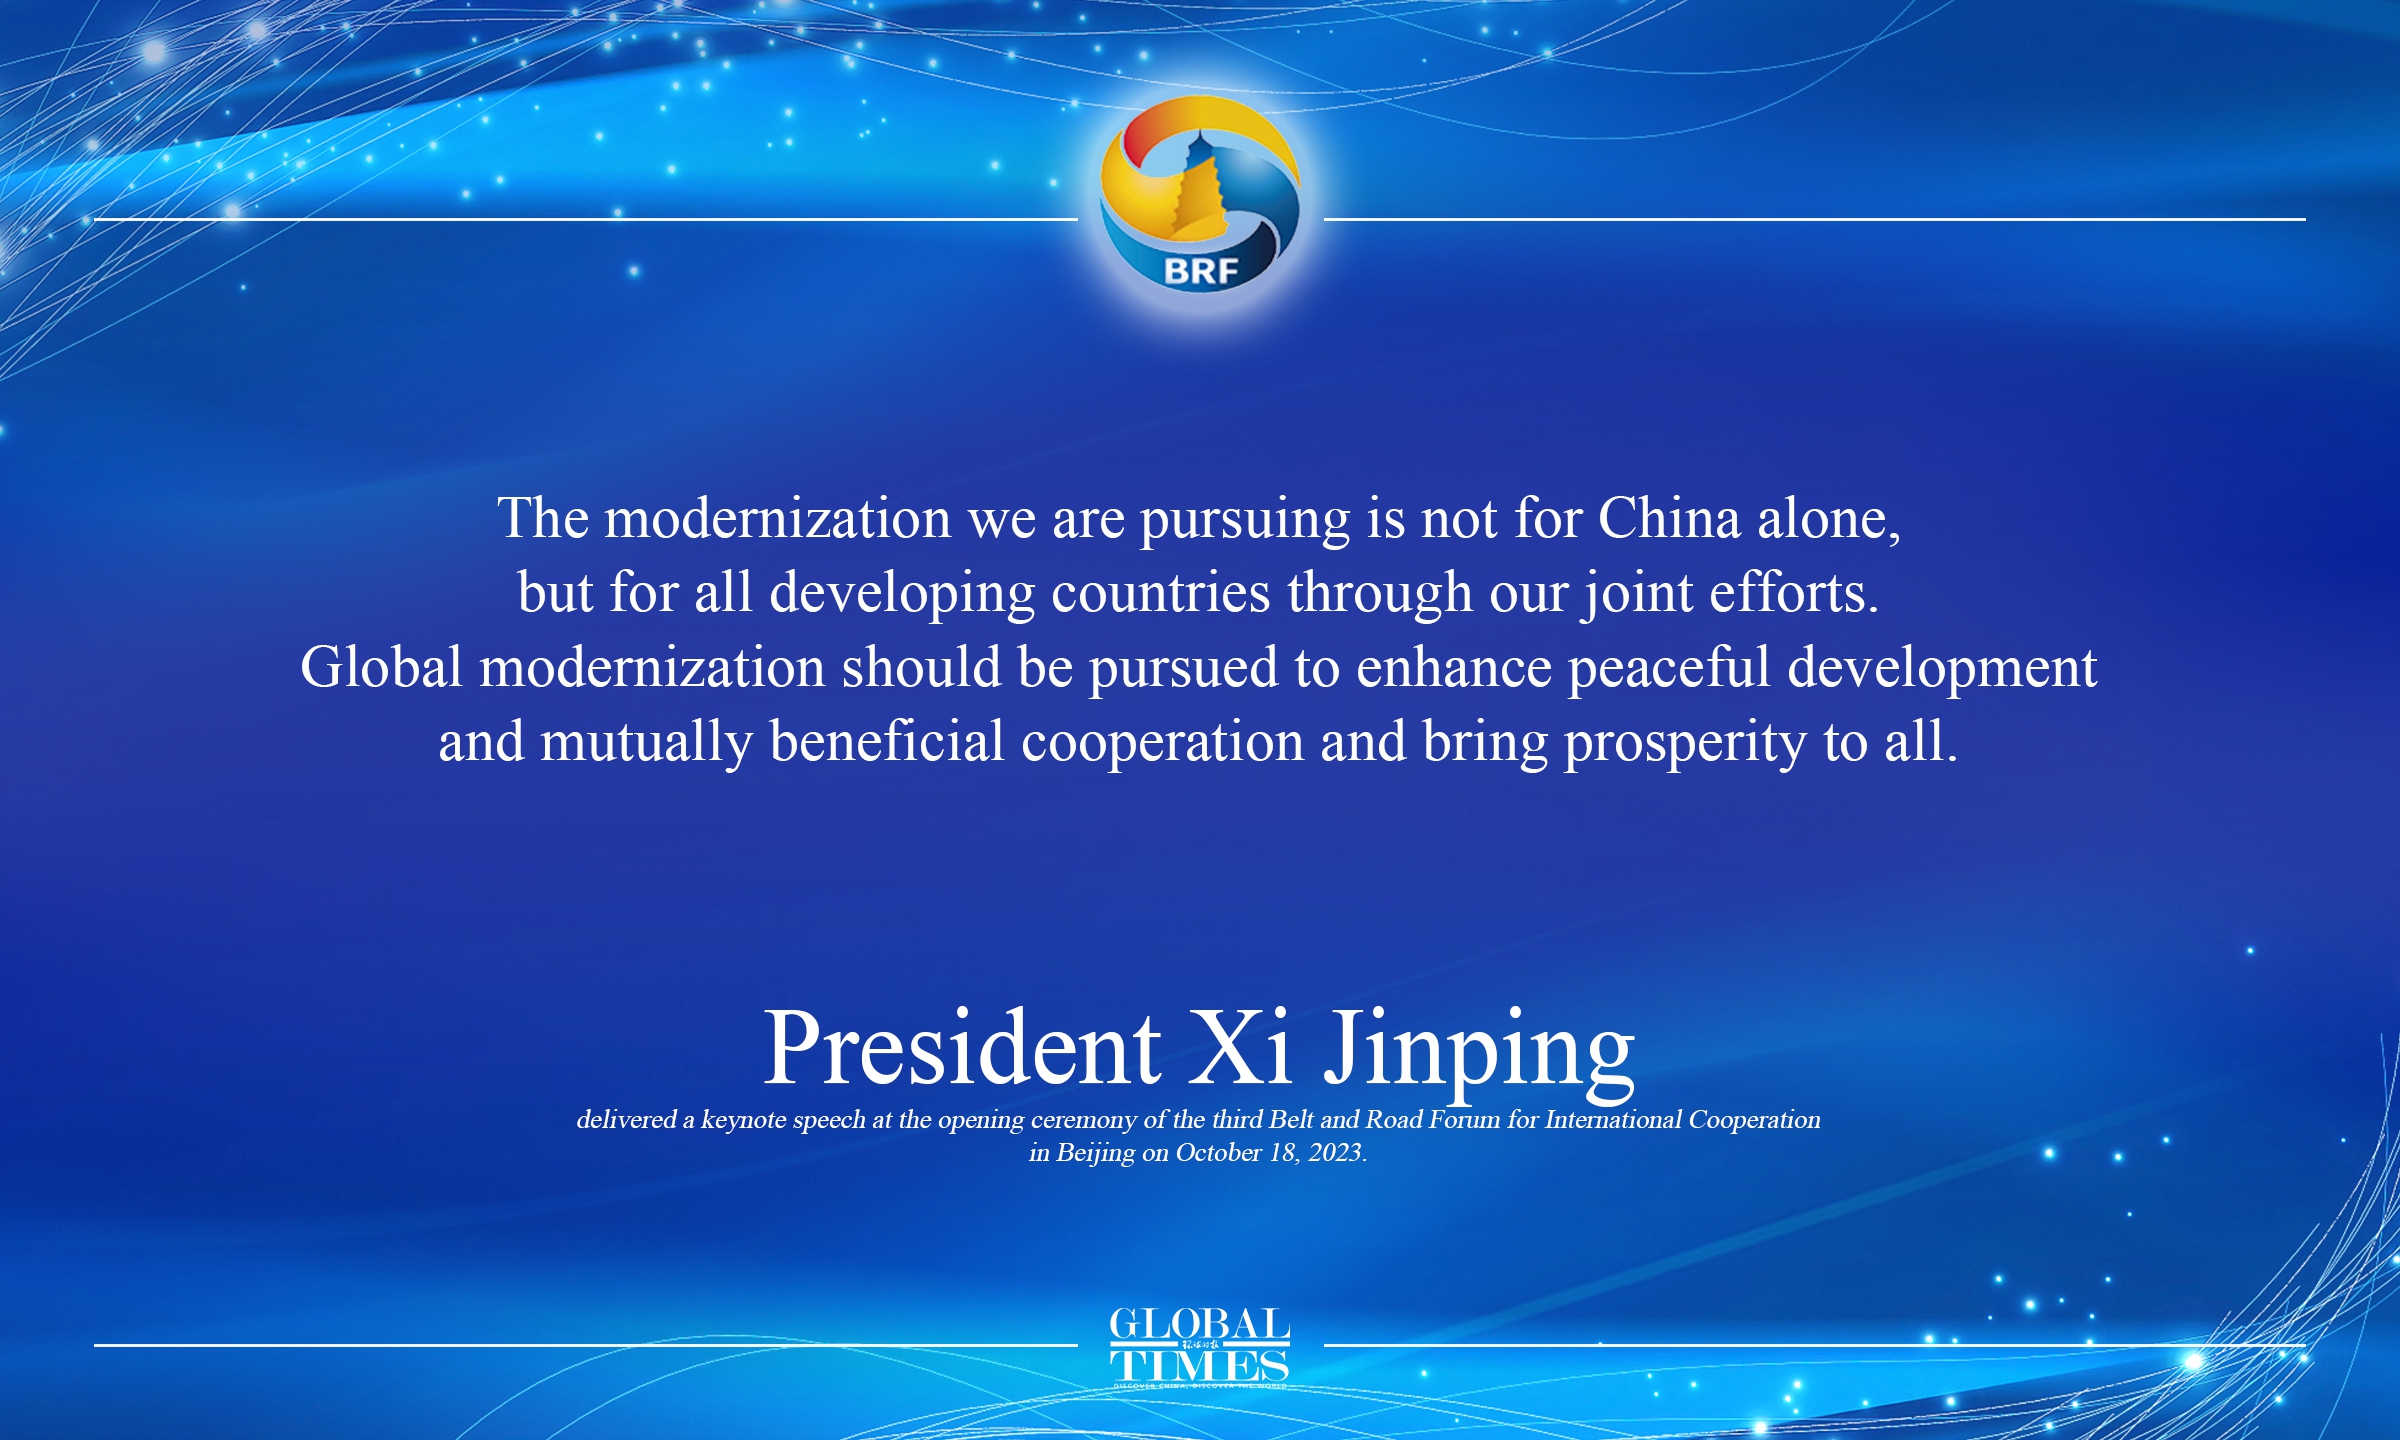 Chinese President Xi Jinping delivered a keynote speech at the opening ceremony of the third Belt and Road Forum for International Cooperation. Here are some highlights of Xi's remarks:

